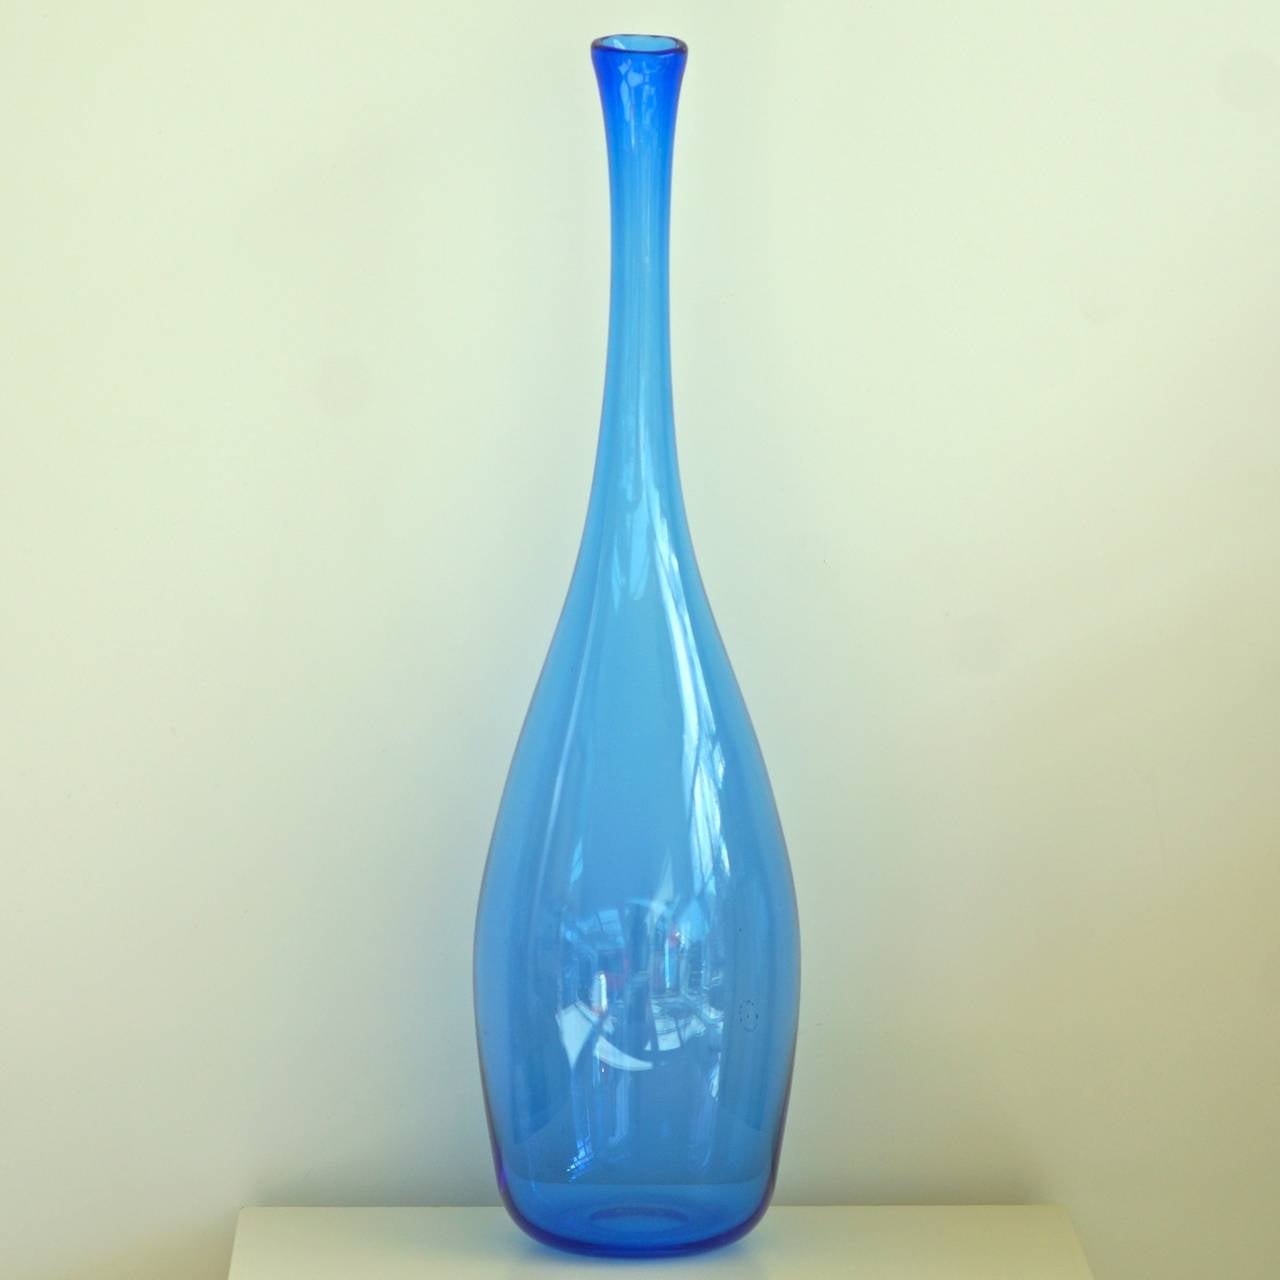 Vase of blue glass, made at the Glassworks Leerdam in Leerdam, after a design,
by Floris Meydam, who is known for his glassdesigns from the 1950s and,
the 1960s. Signed and dated with a yearcode LL=1961.